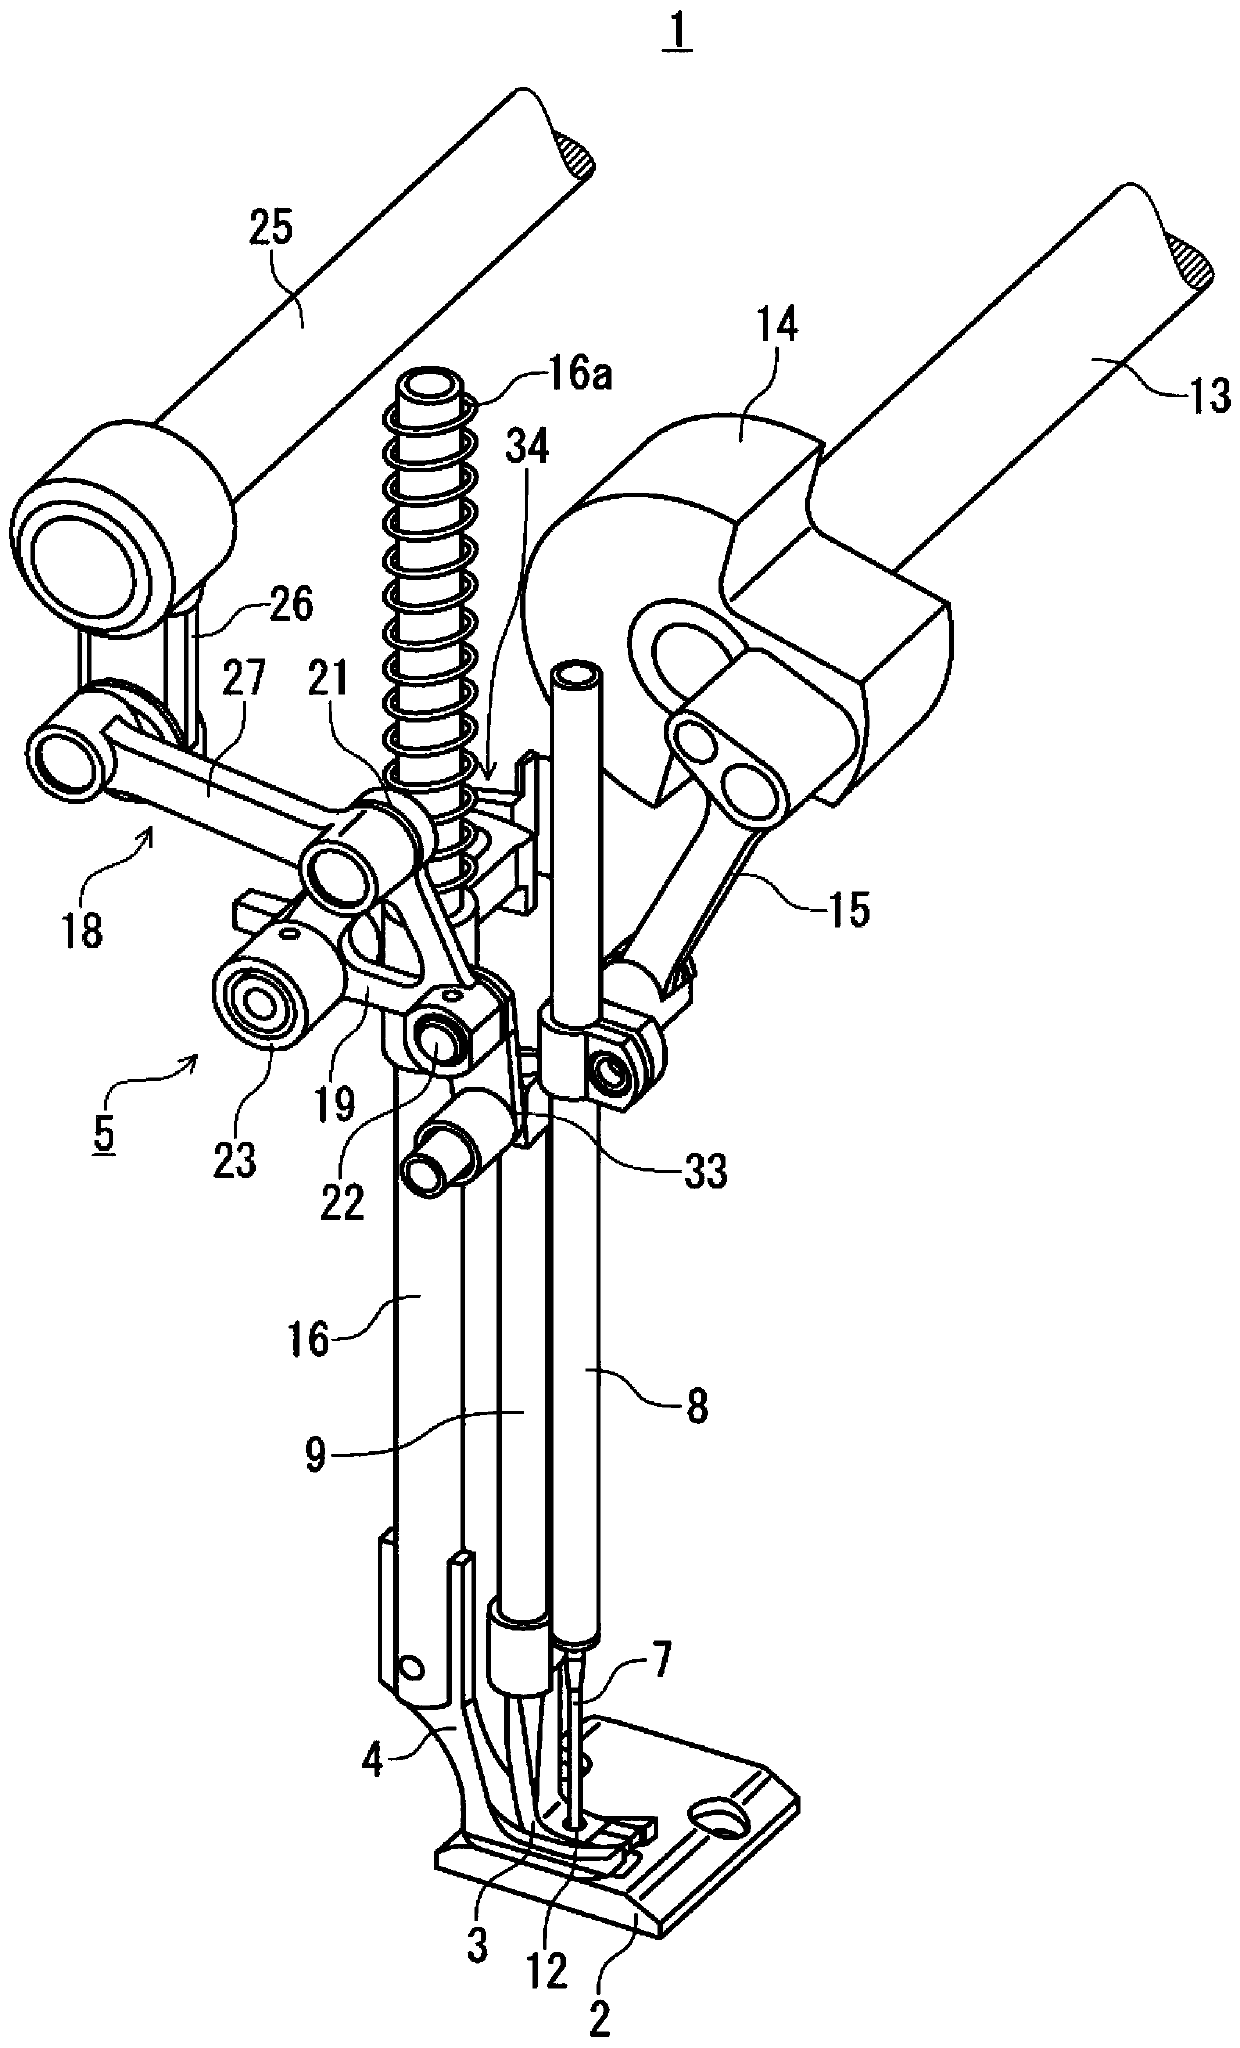 Control method of sewing machine